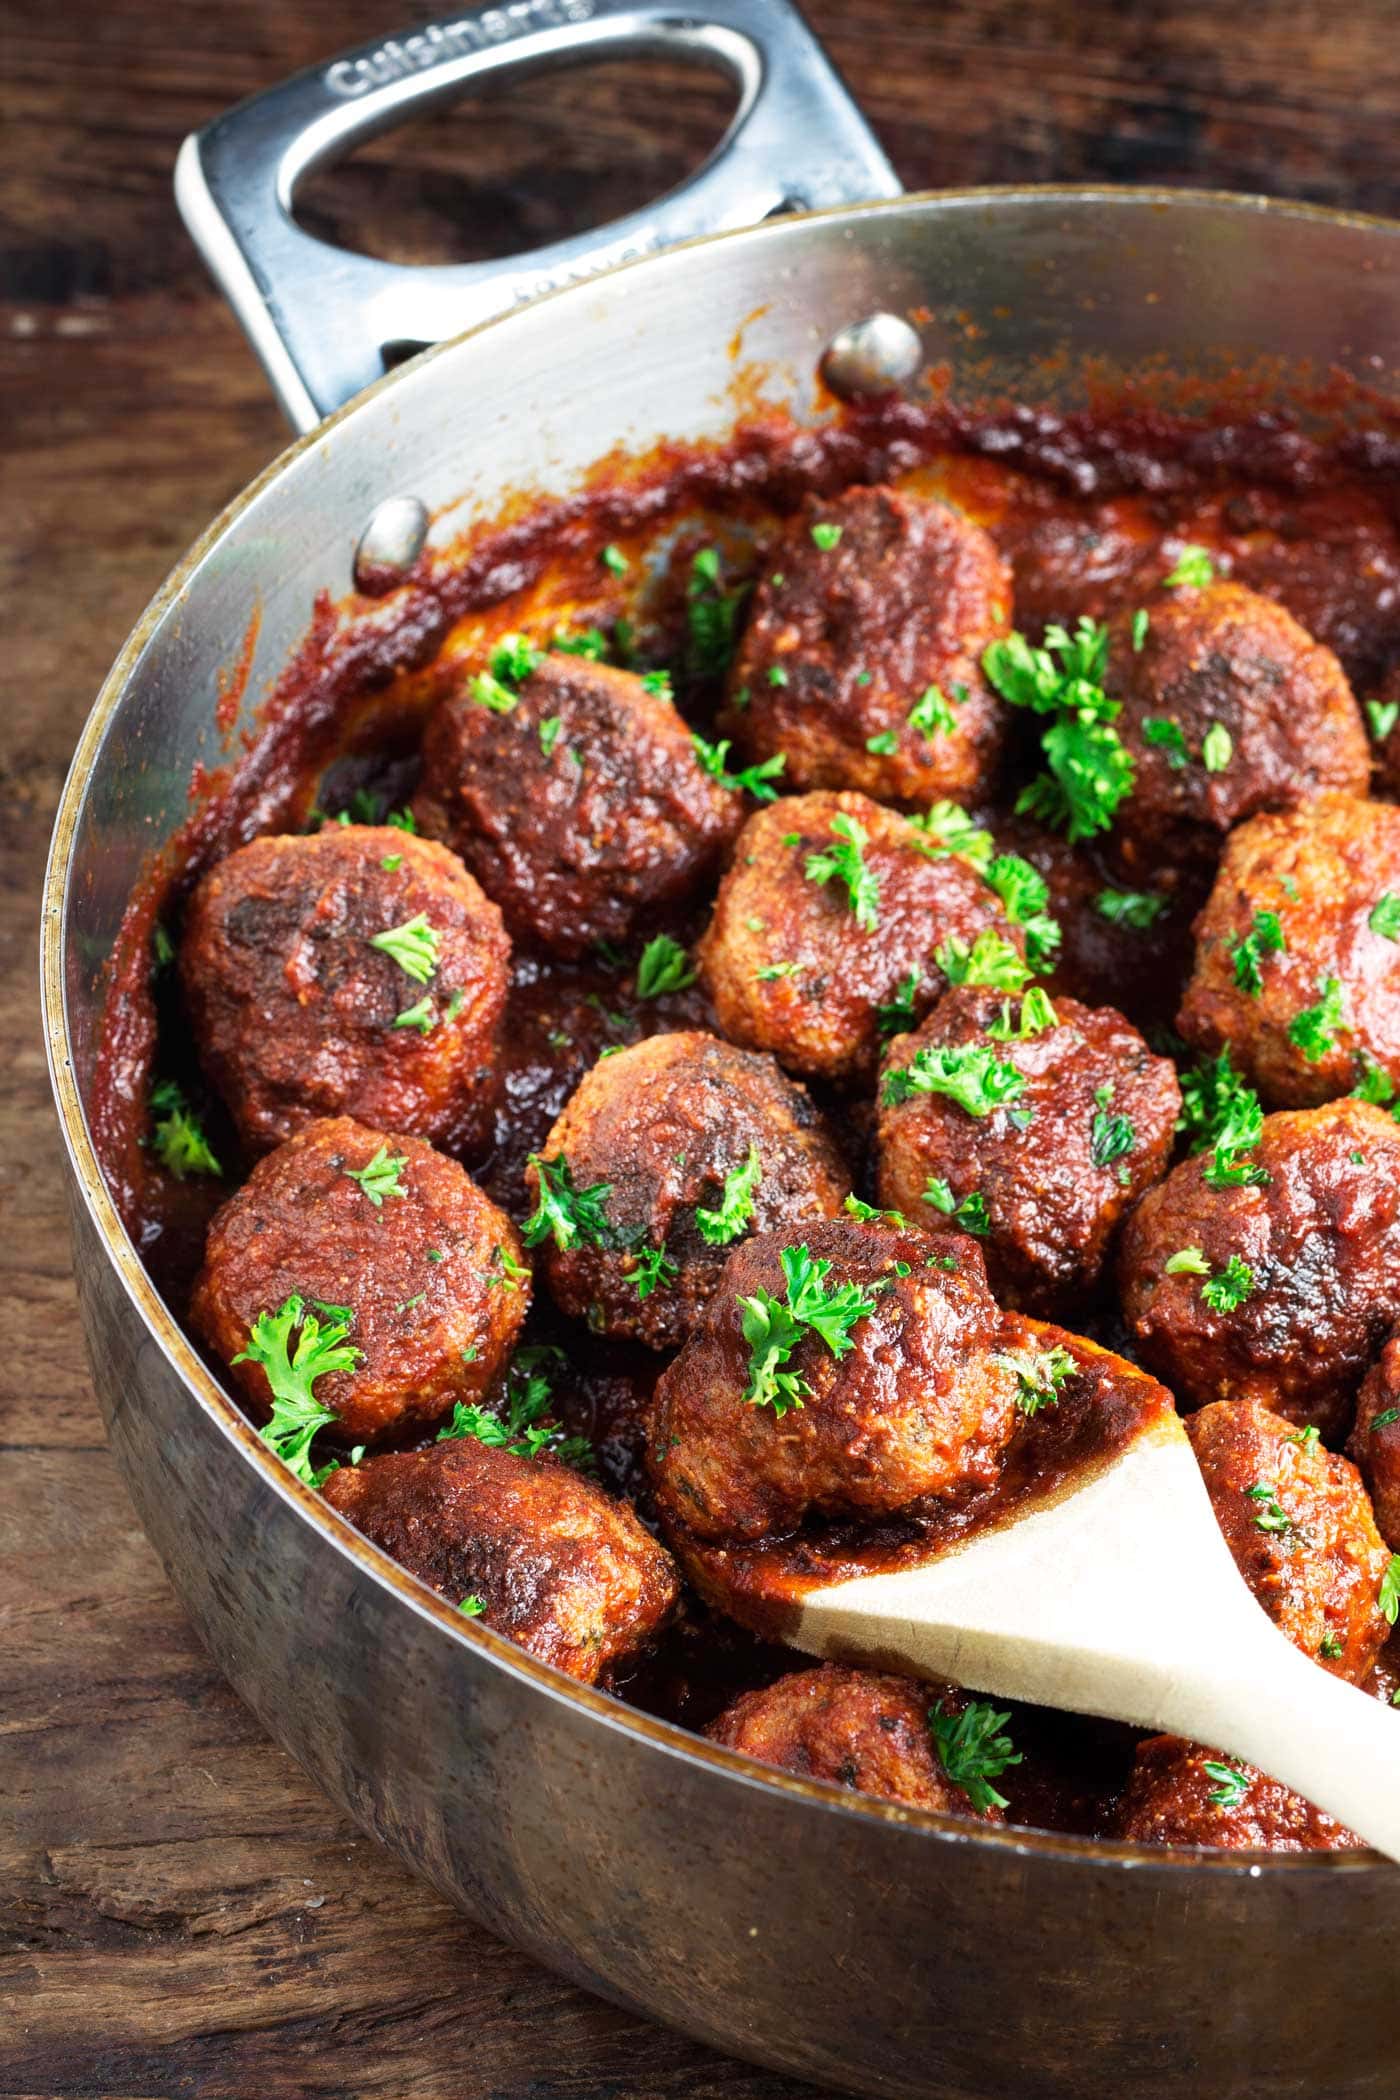 Perfect as a game day appetizer or for dinner! These bacon bourbon meatballs are easy to make and full of flavor. They are paleo, gluten free, dairy free, low carb, and can be made keto!